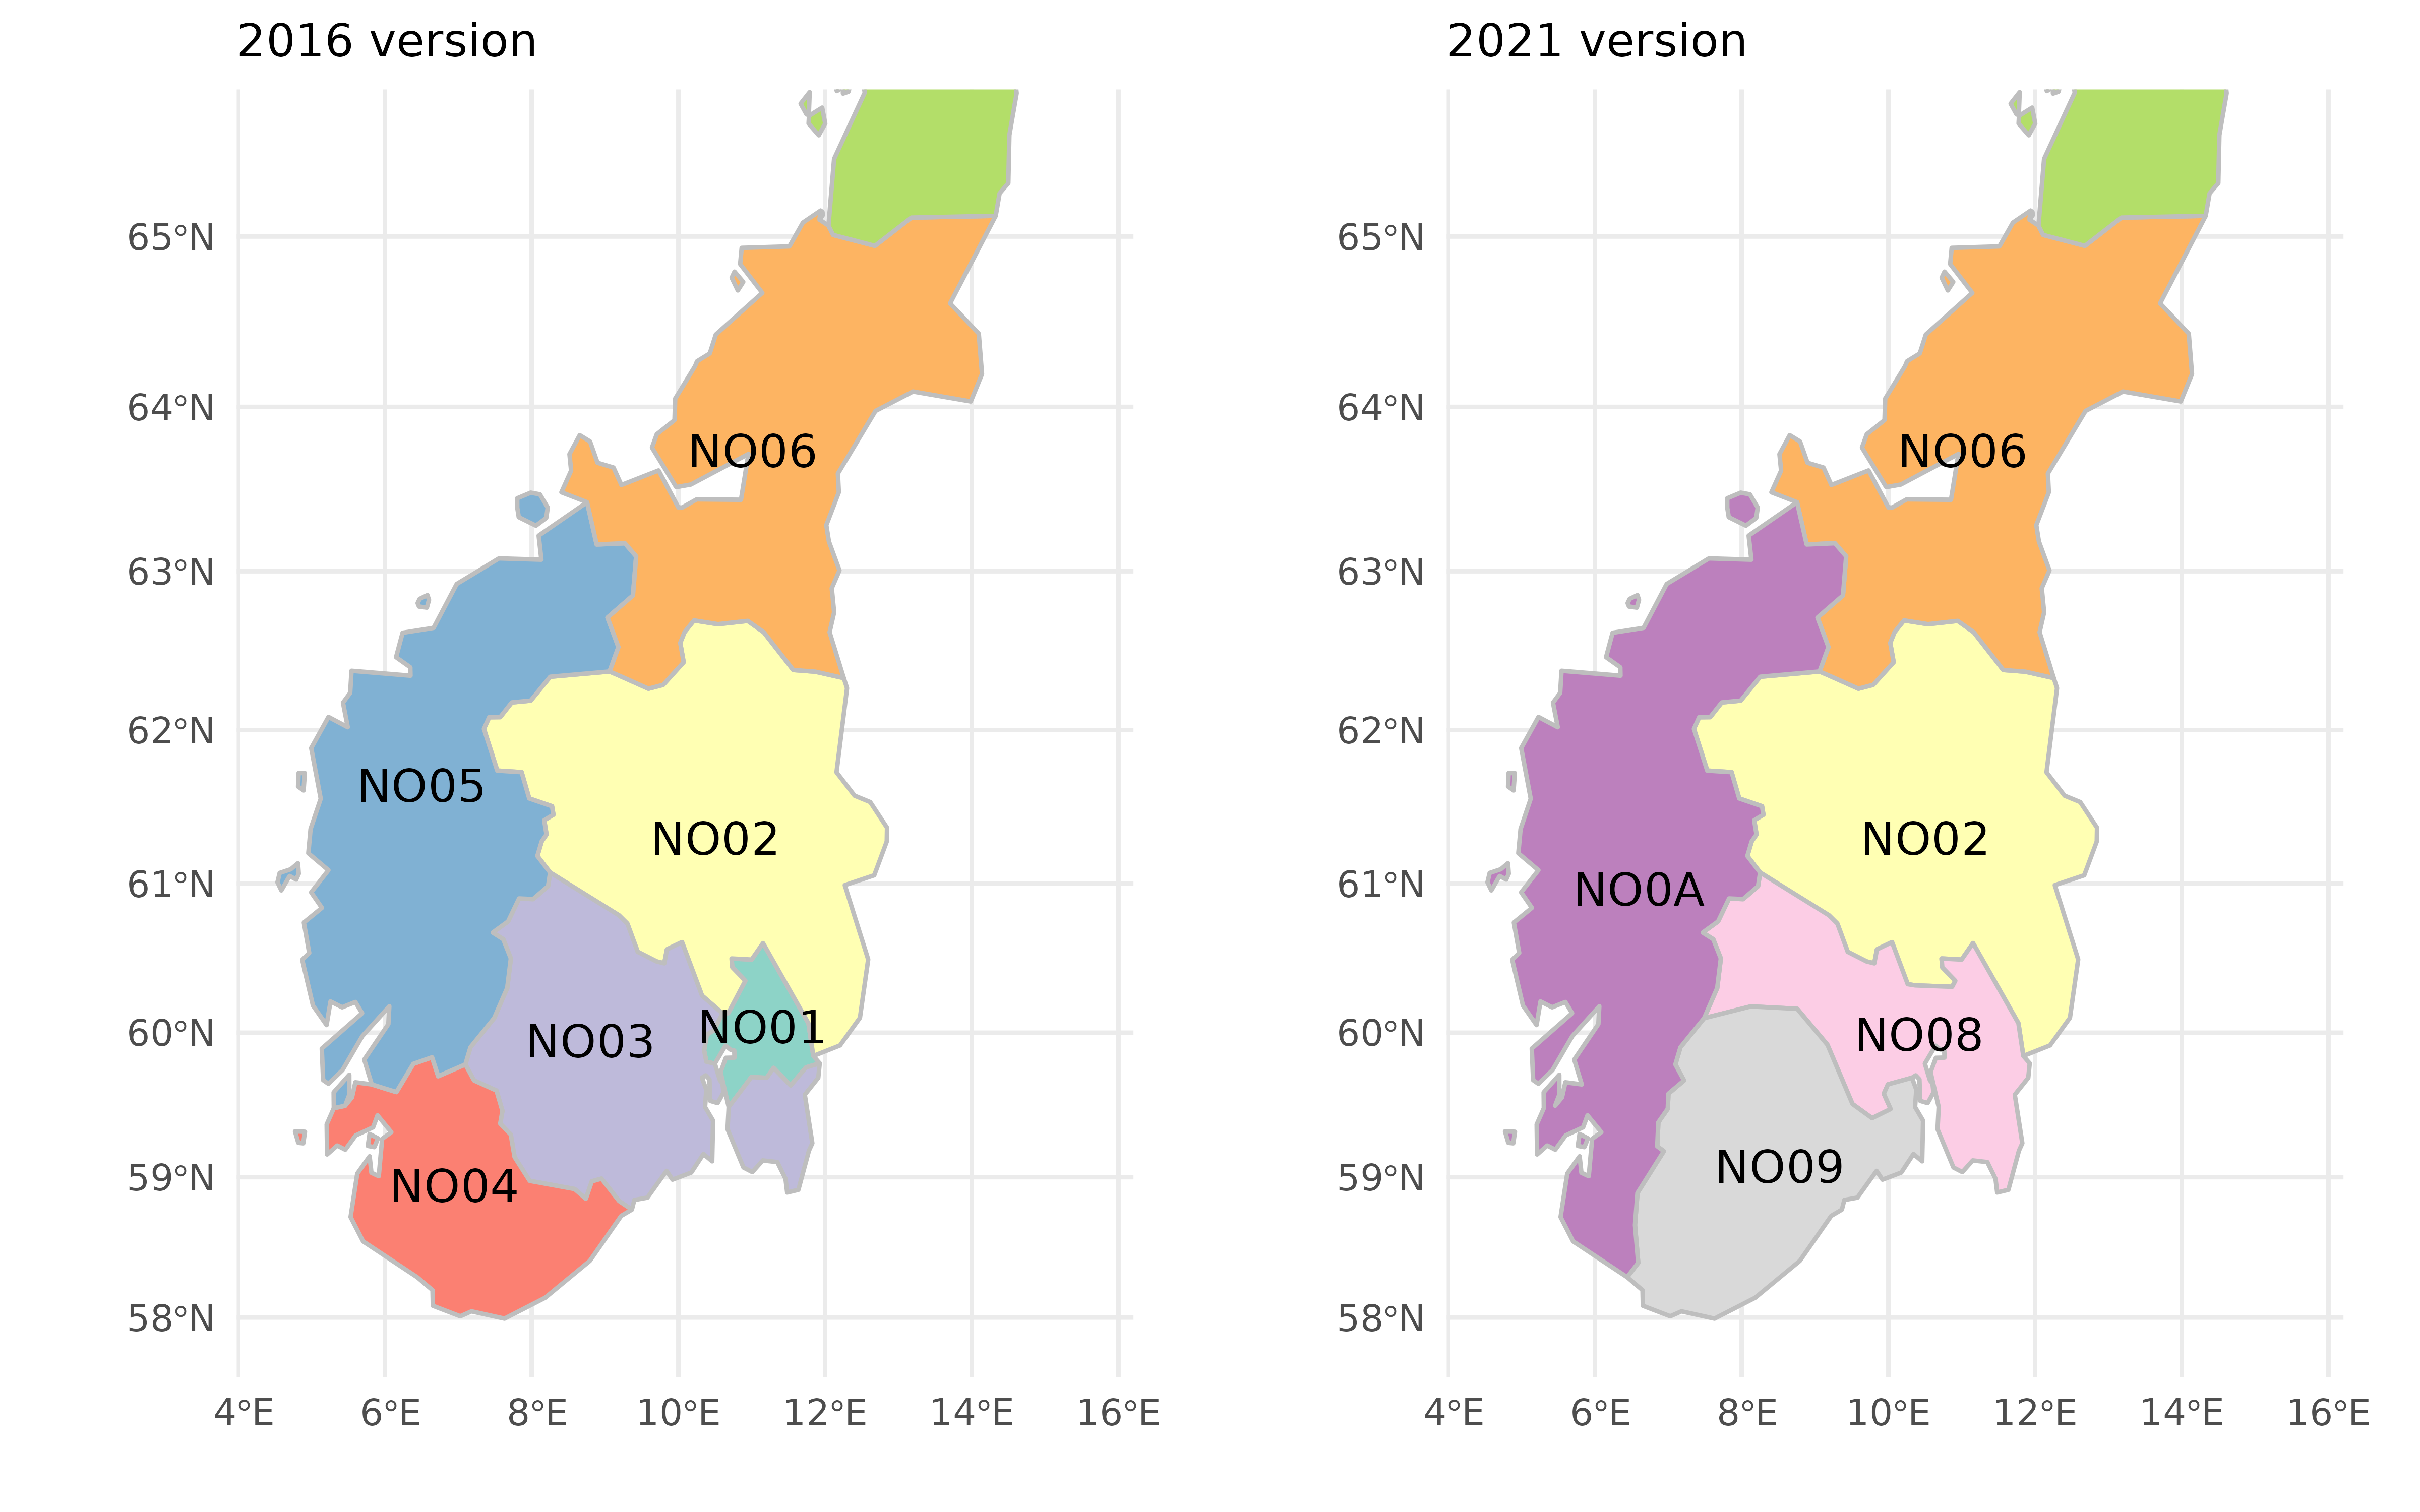 Two maps of Norwegian NUTS-2 regions in version 2016 and 2021. The most Eastern and Southern regions have been affected most by administrative redistricting.